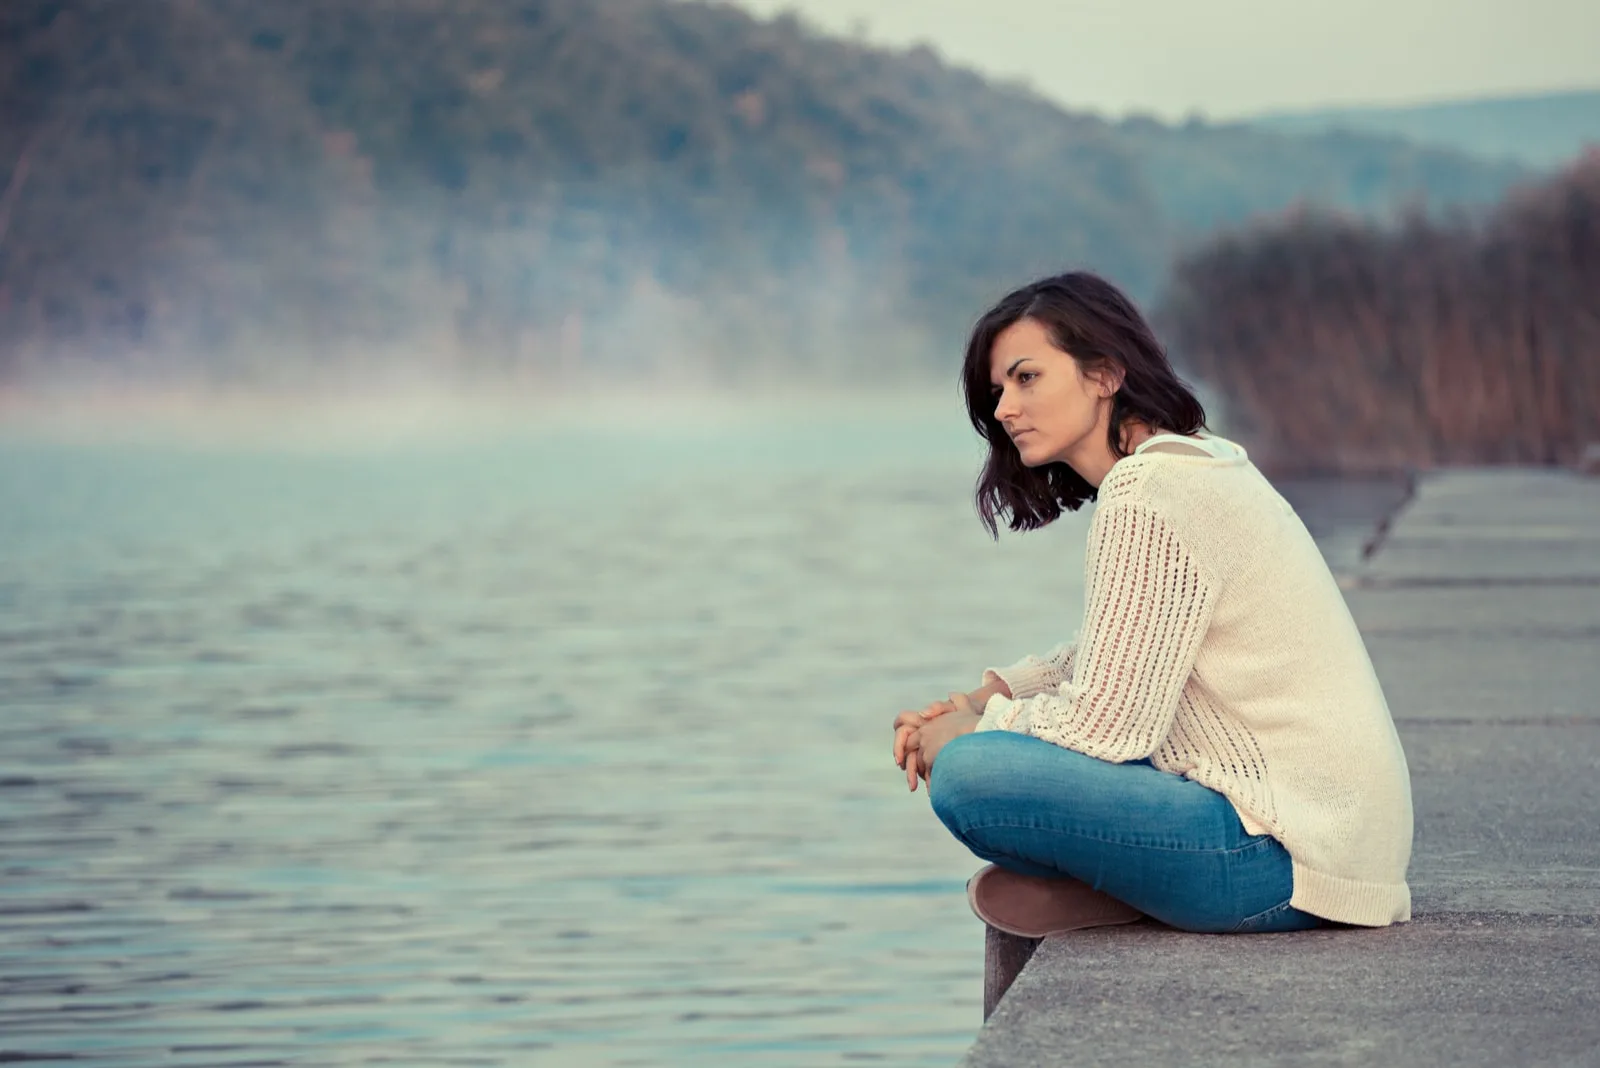 the woman sits pensively beside the pier